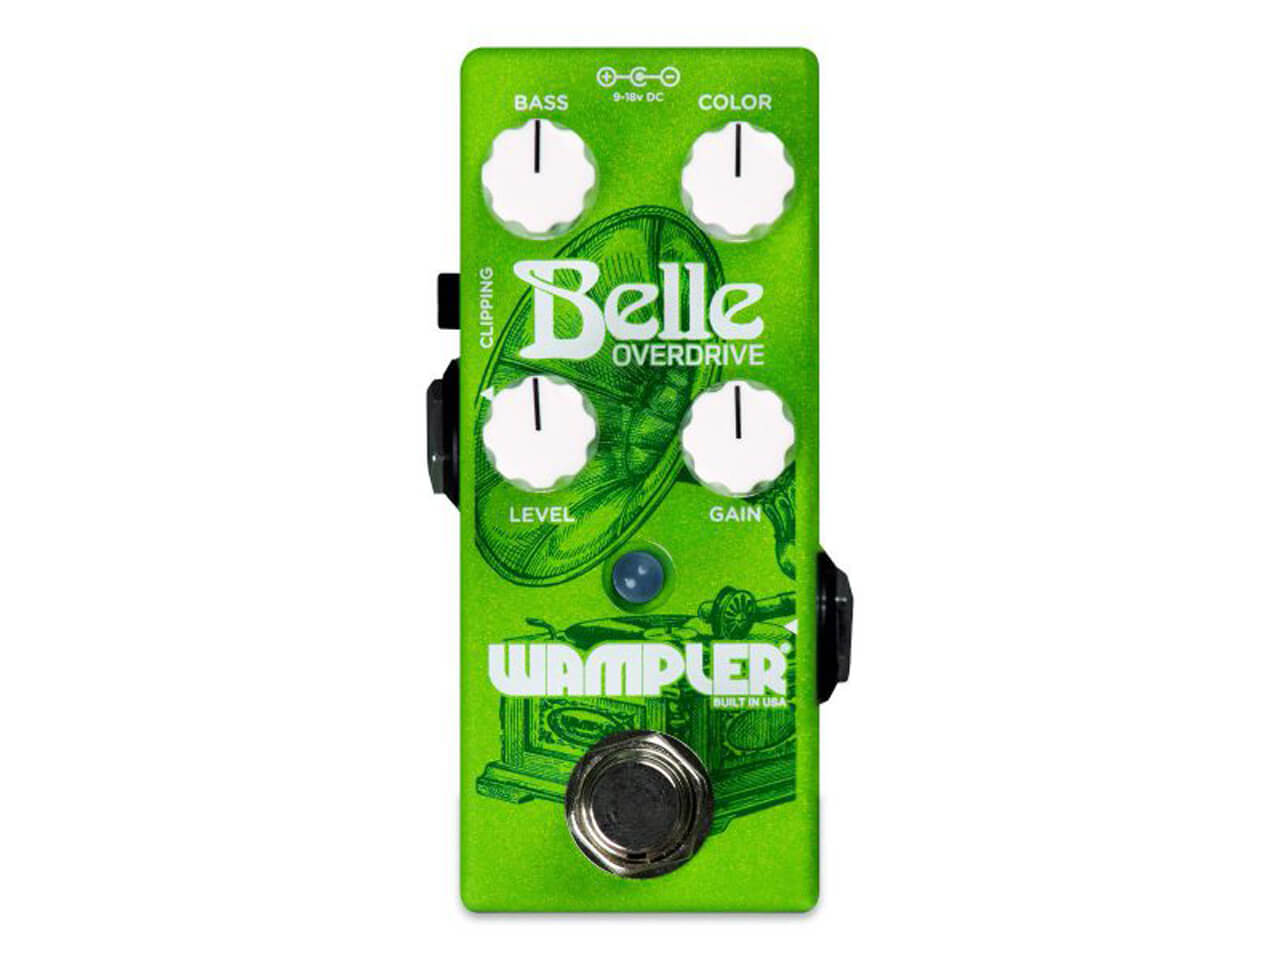 Wampler Pedals Belle Overdrive<br>(オーバードライブ)(ワンプラーペダル) 駅前店